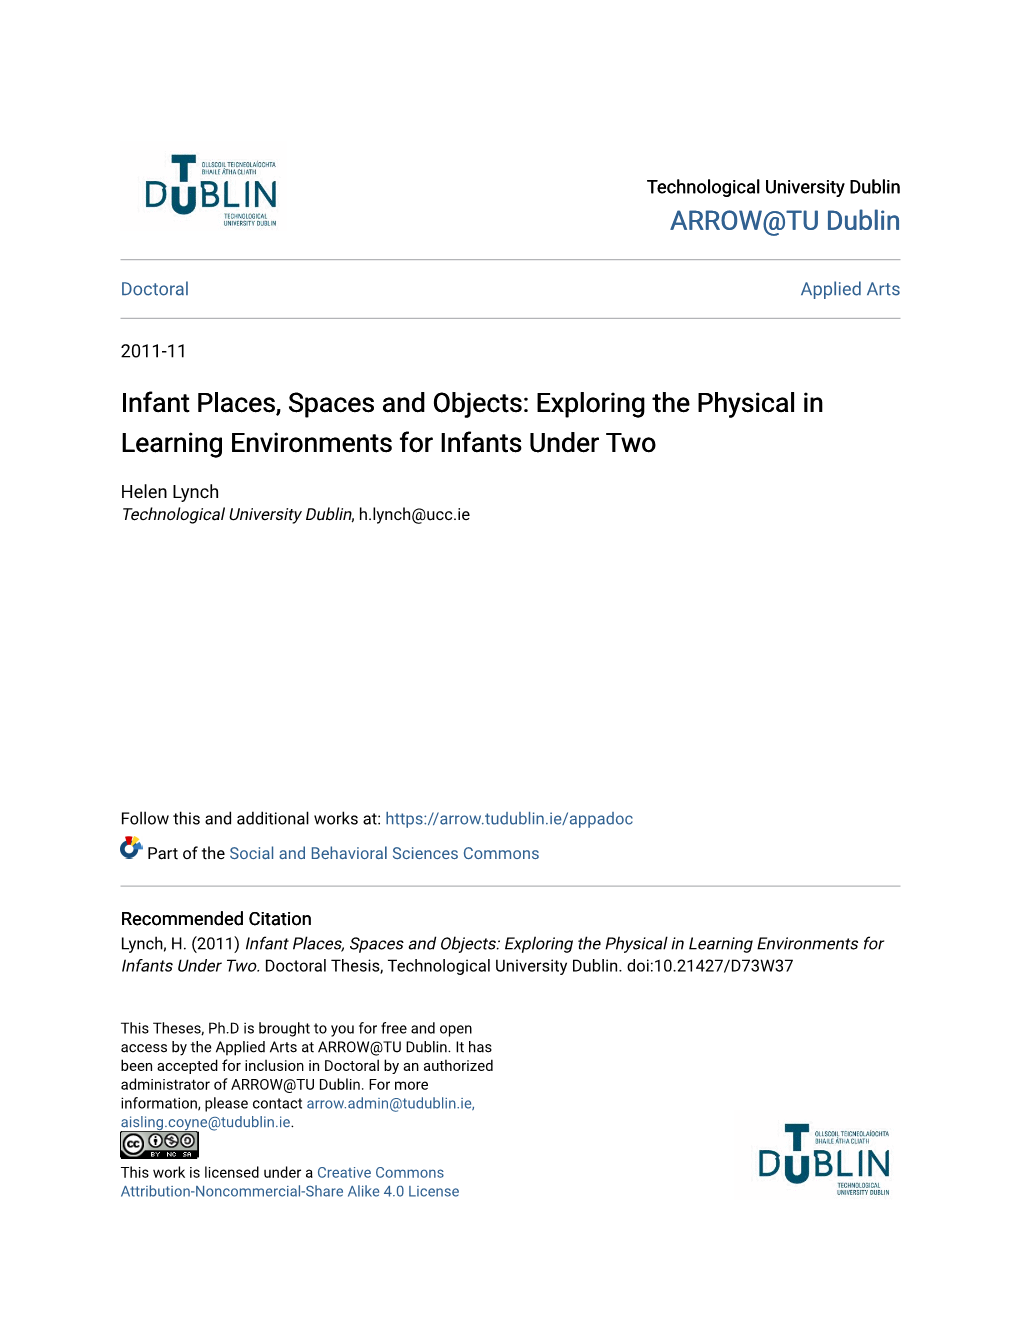 Infant Places, Spaces and Objects: Exploring the Physical in Learning Environments for Infants Under Two